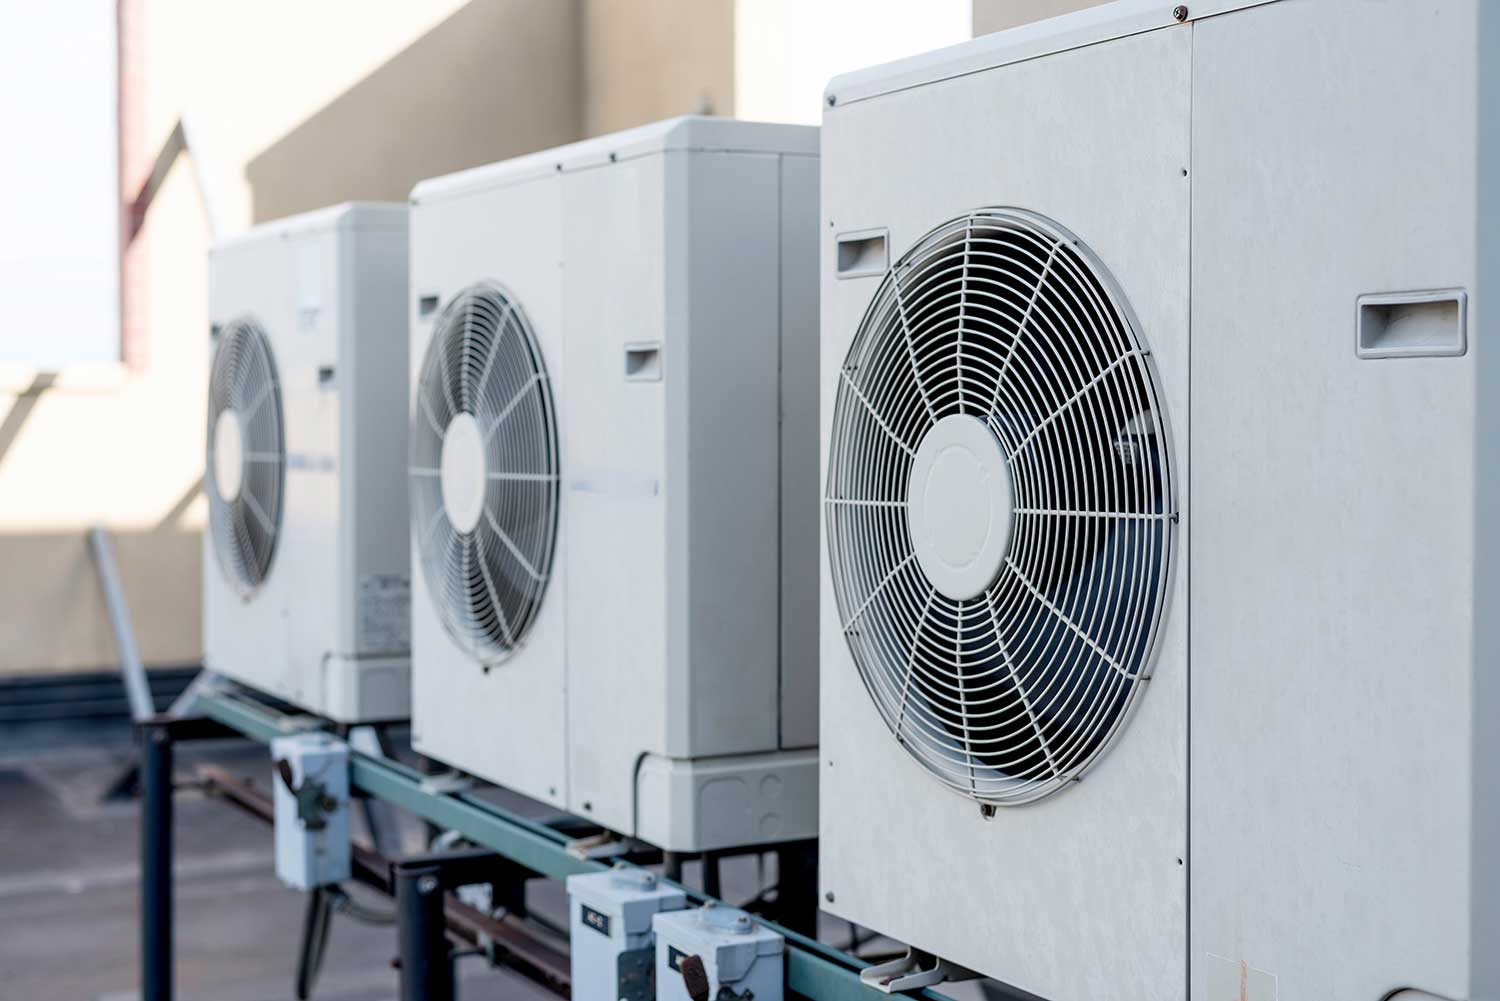 You must have the right size HVAC unit for your home or you may not be getting enough heat